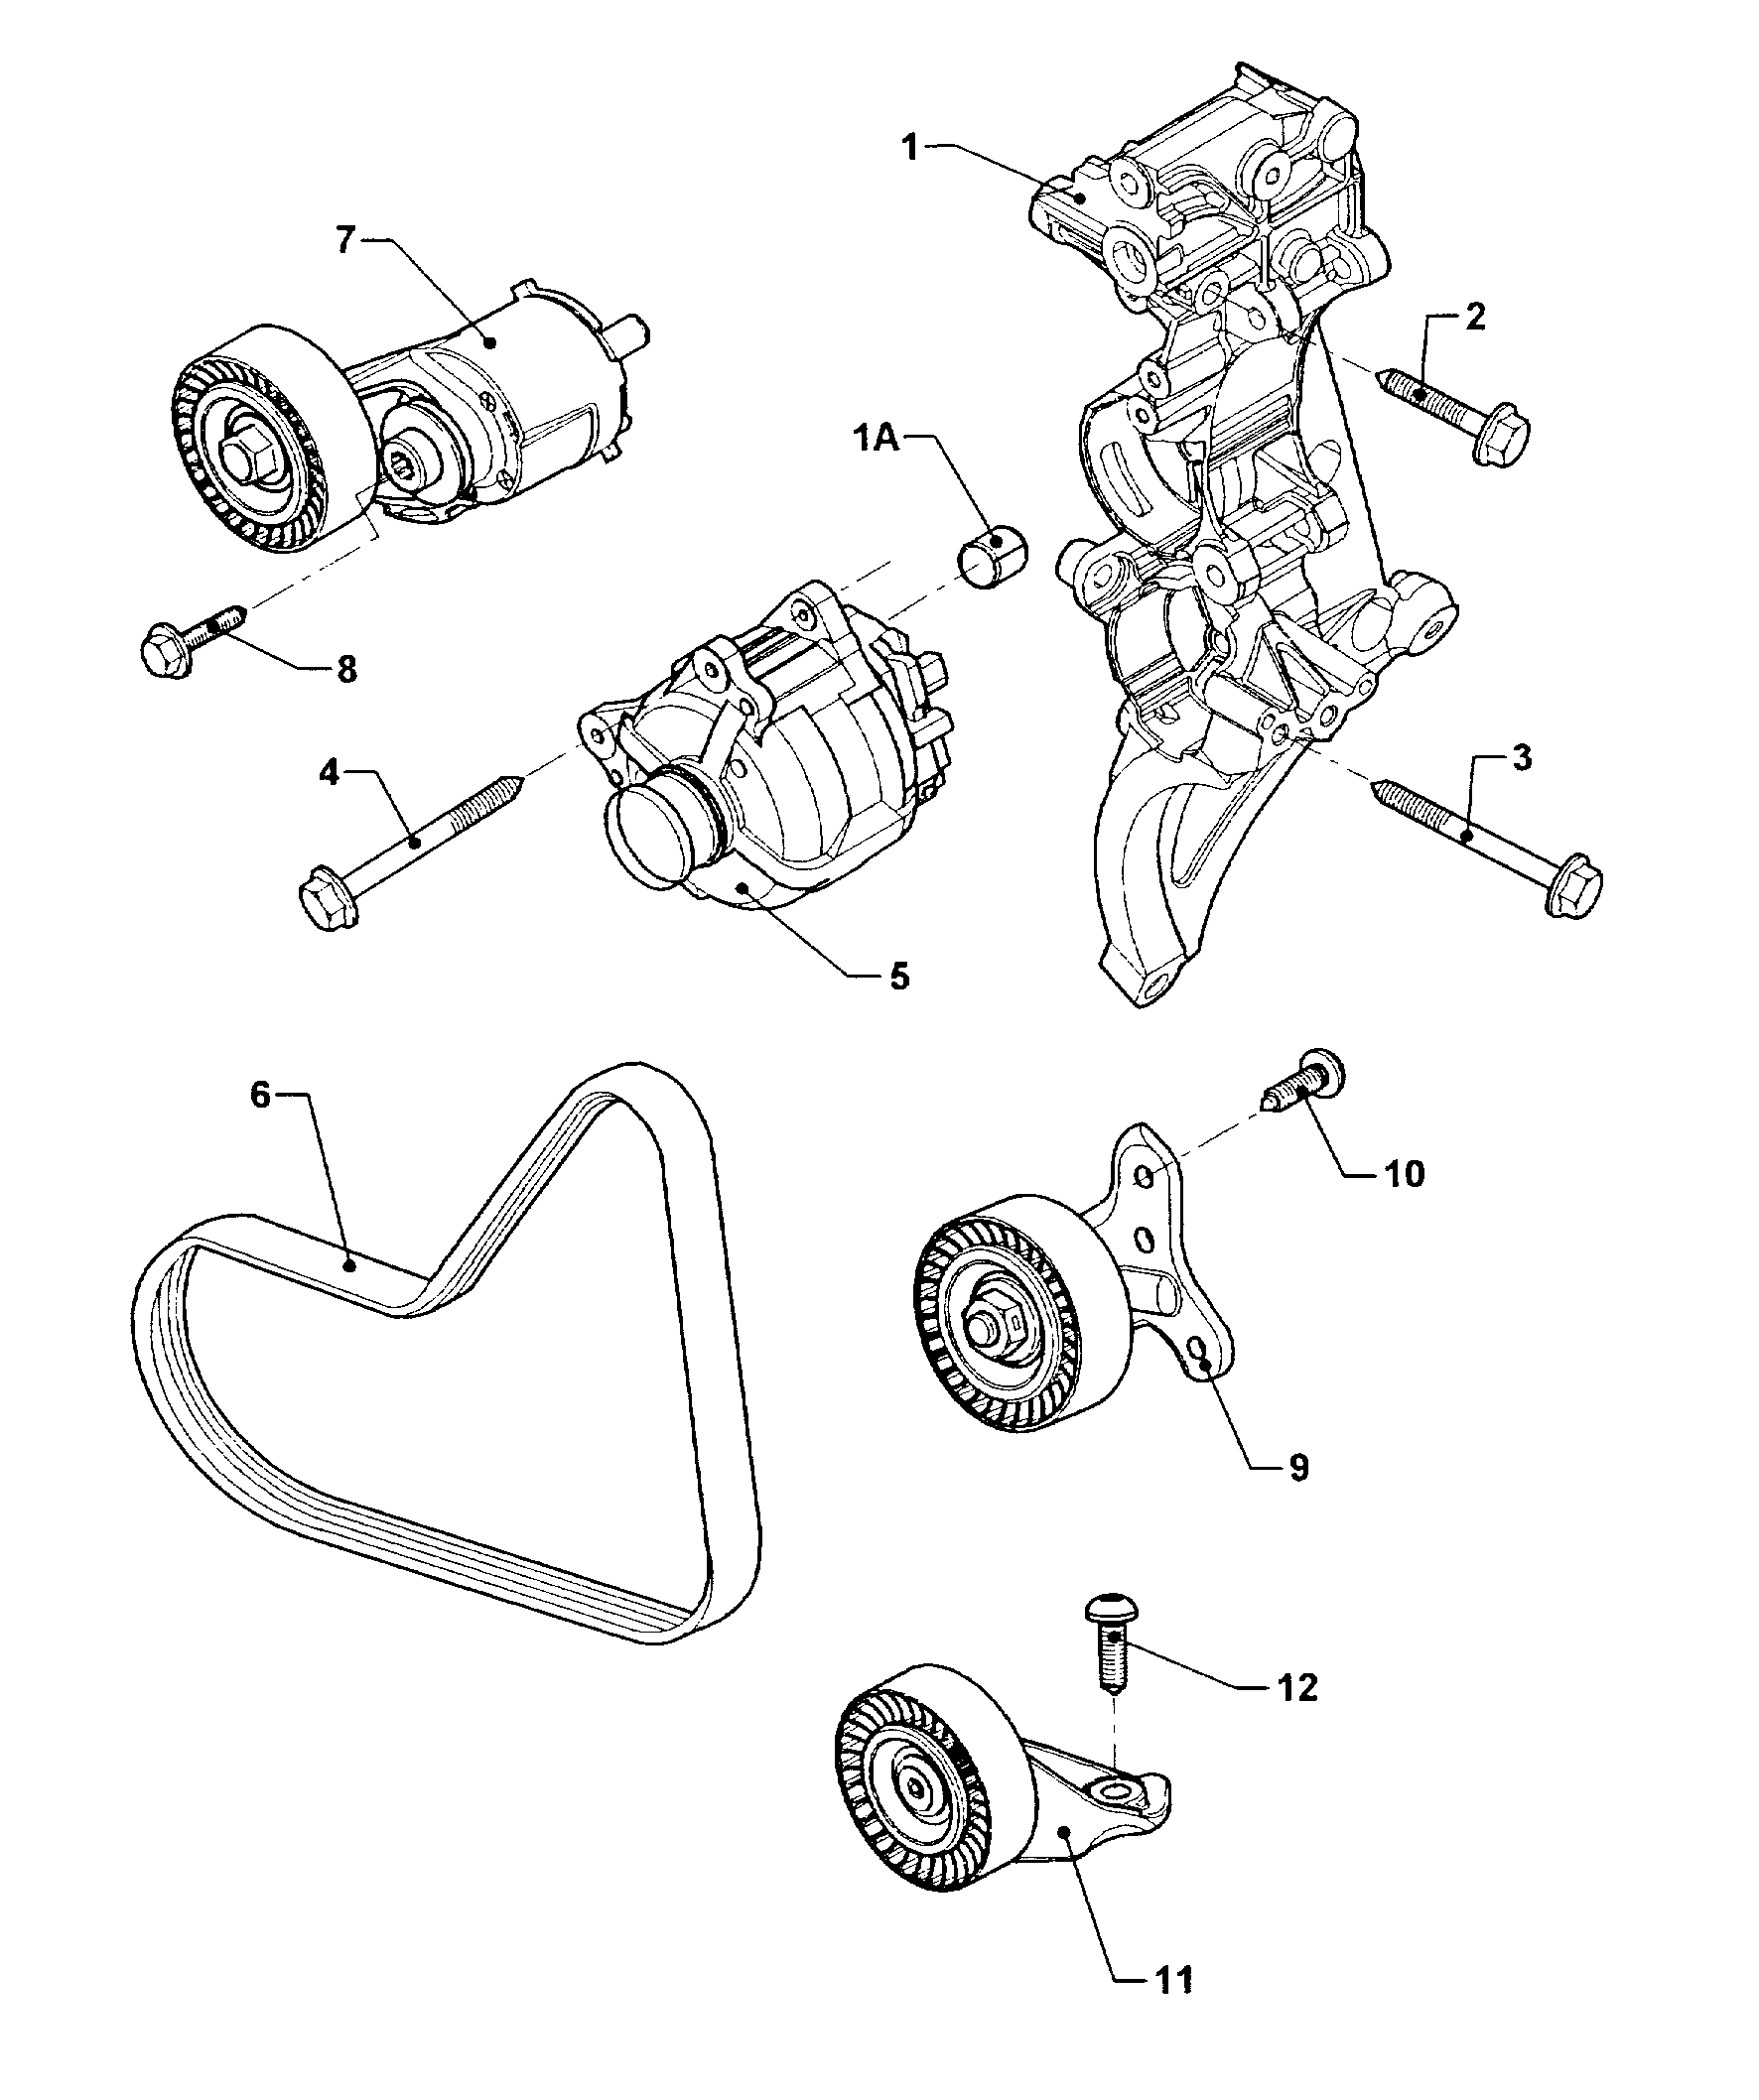 connecting and mounting parts<br>for alternatorPoly-V-belt 2.5Ltr. - Beetle Cabrio - bec